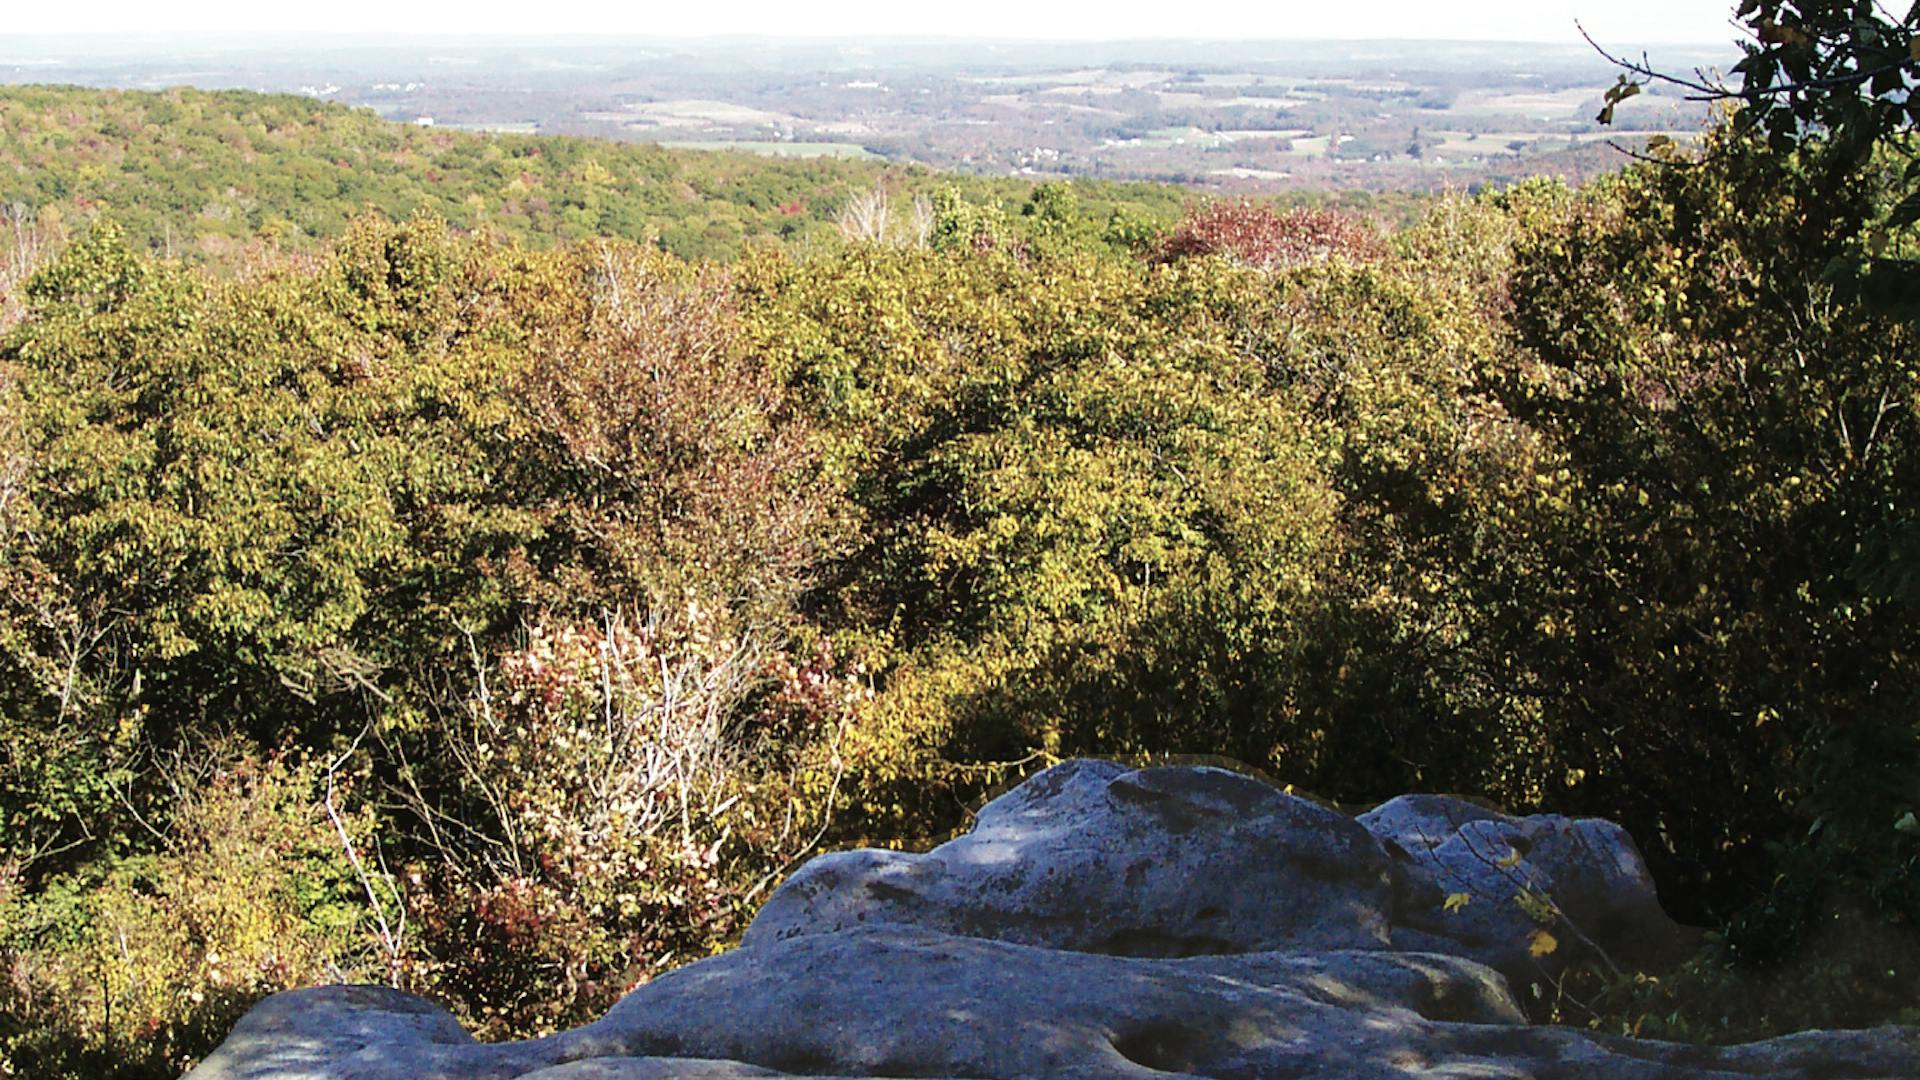 Beam Rocks at Forbes State Forest in Pennsylvania (photo courtesy of Pennsylvania Department of Conservation and Natural Resources)